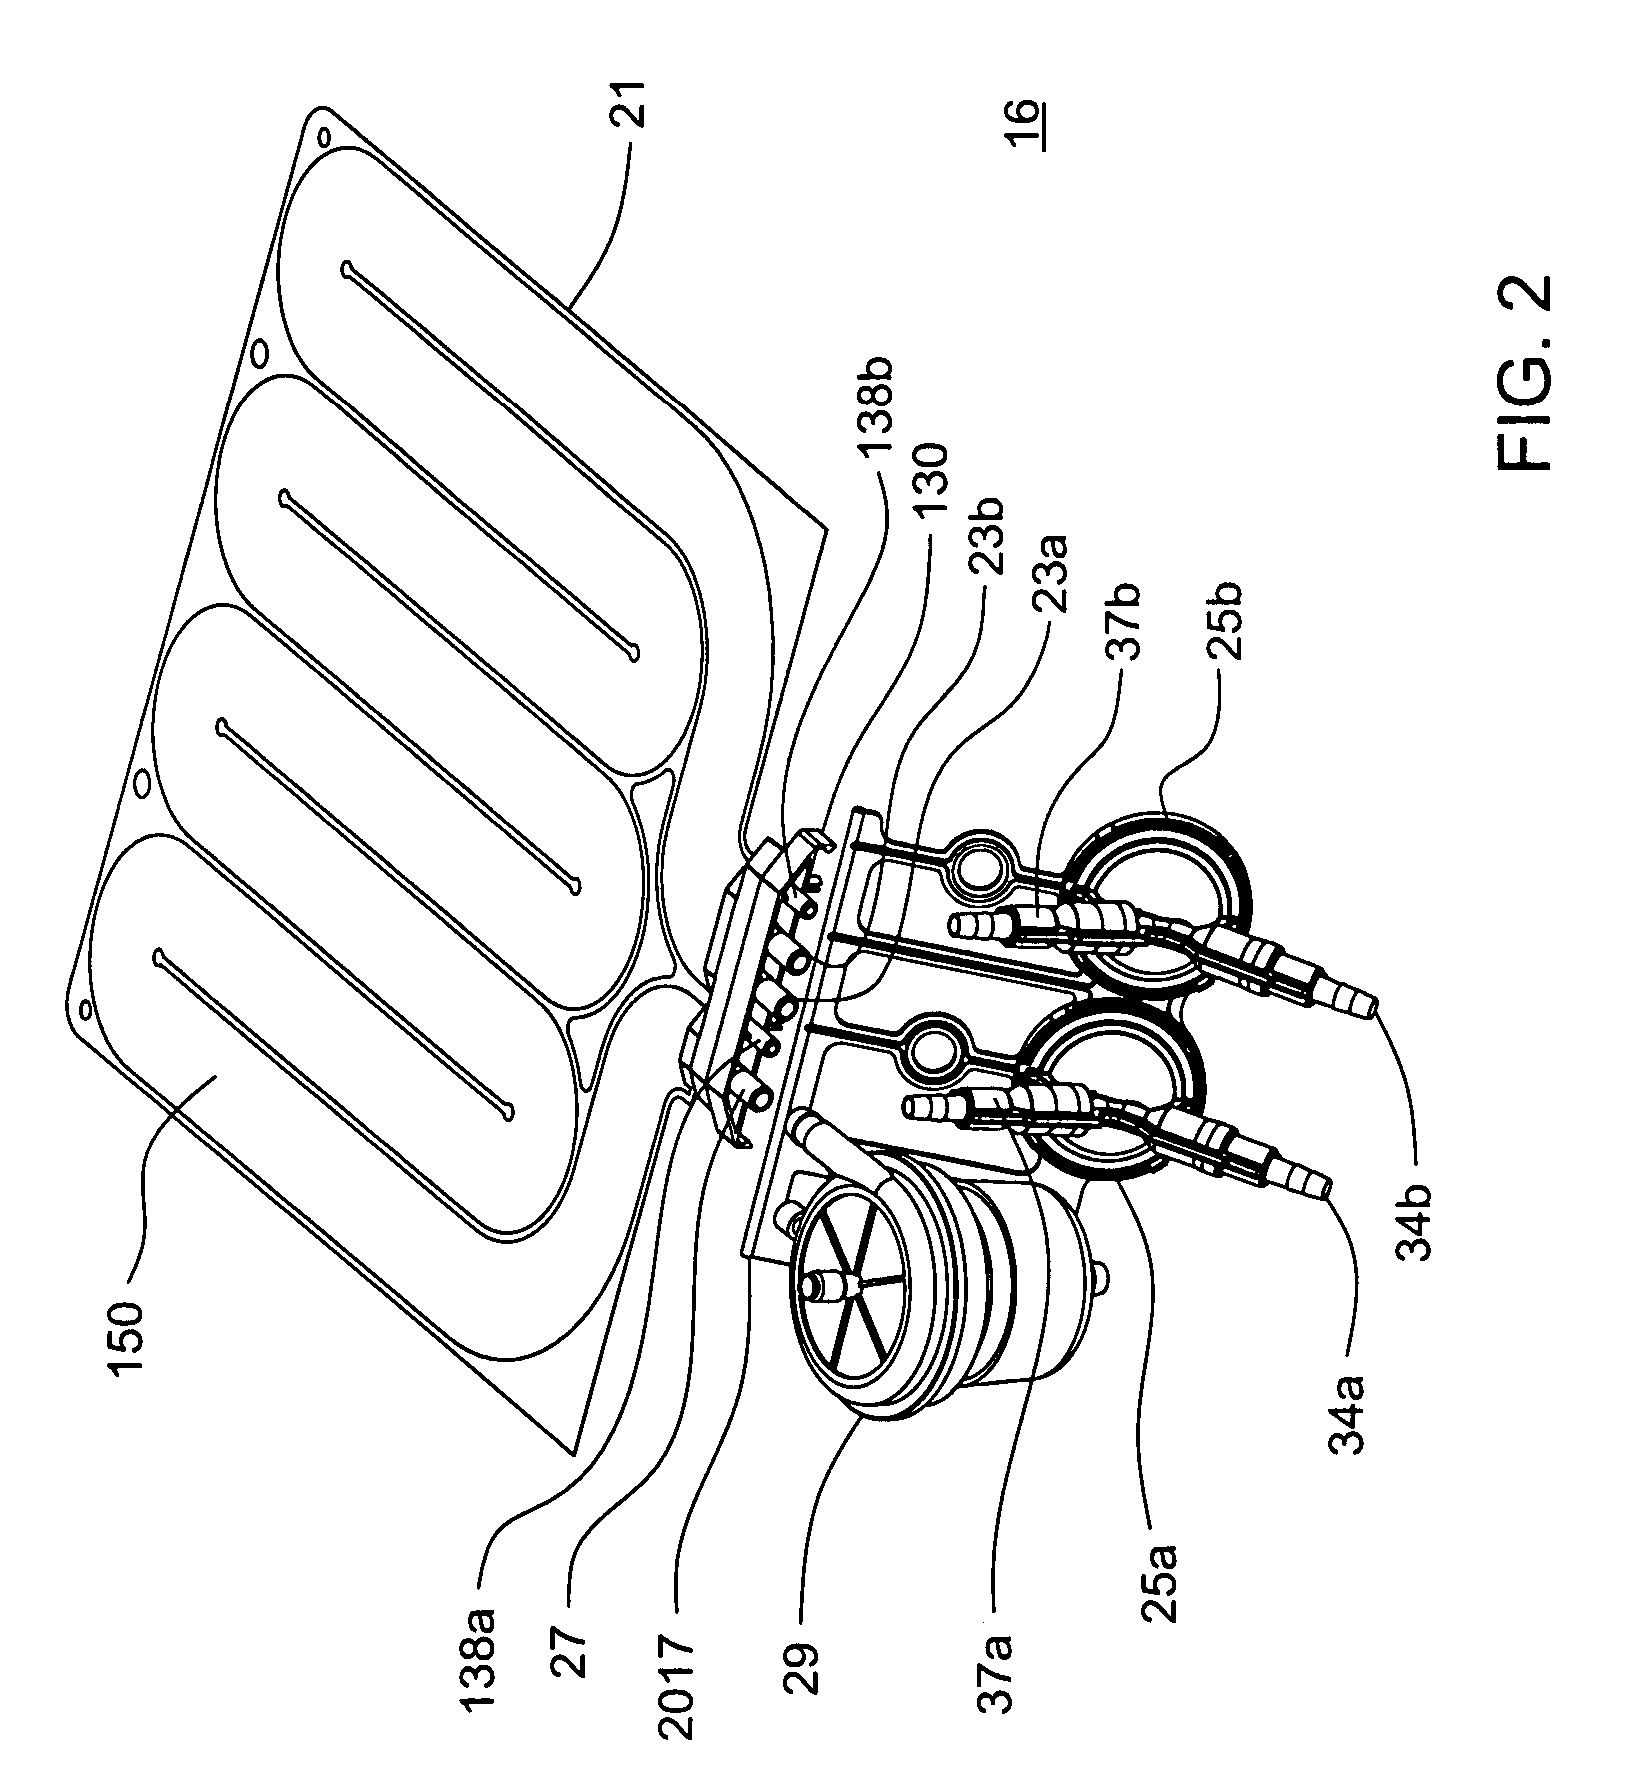 Thermal and conductivity sensing systems, devices and methods